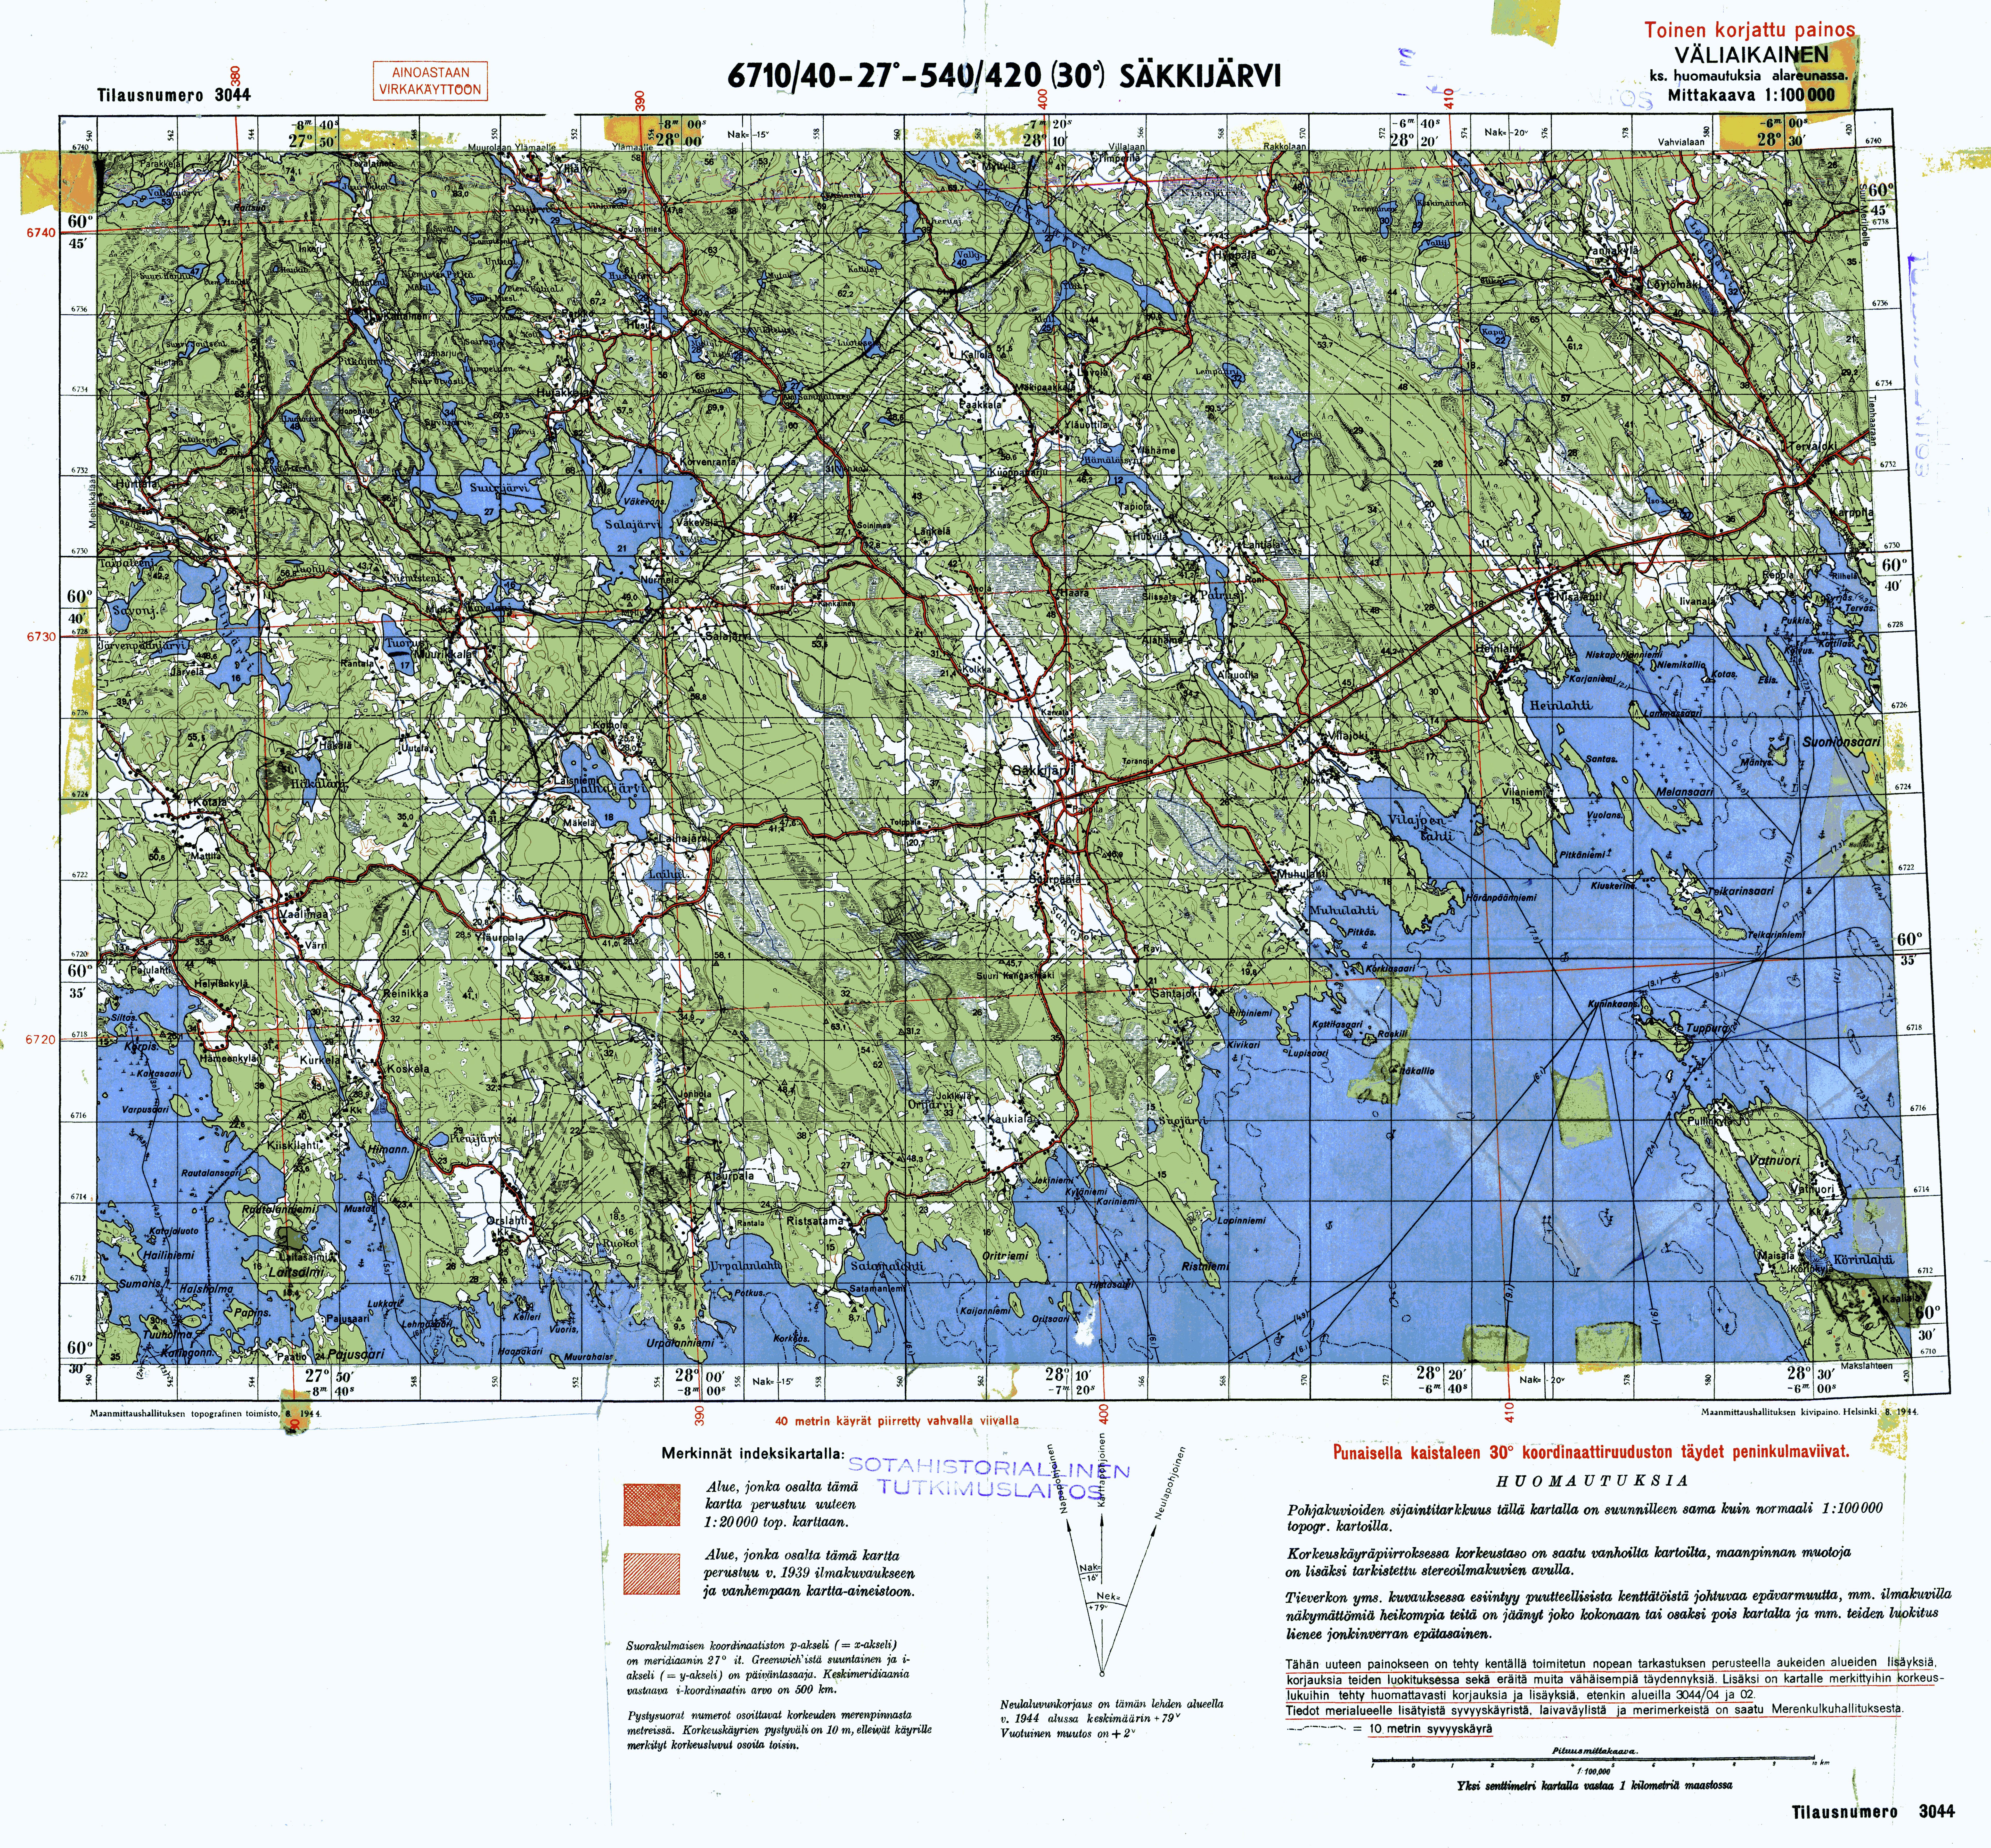 Kondratyevo. Säkkijärvi. Topografikartta 3044. Topographic map from 1944. Use the zooming tool to explore in higher level of detail. Obtain as a quality print or high resolution image